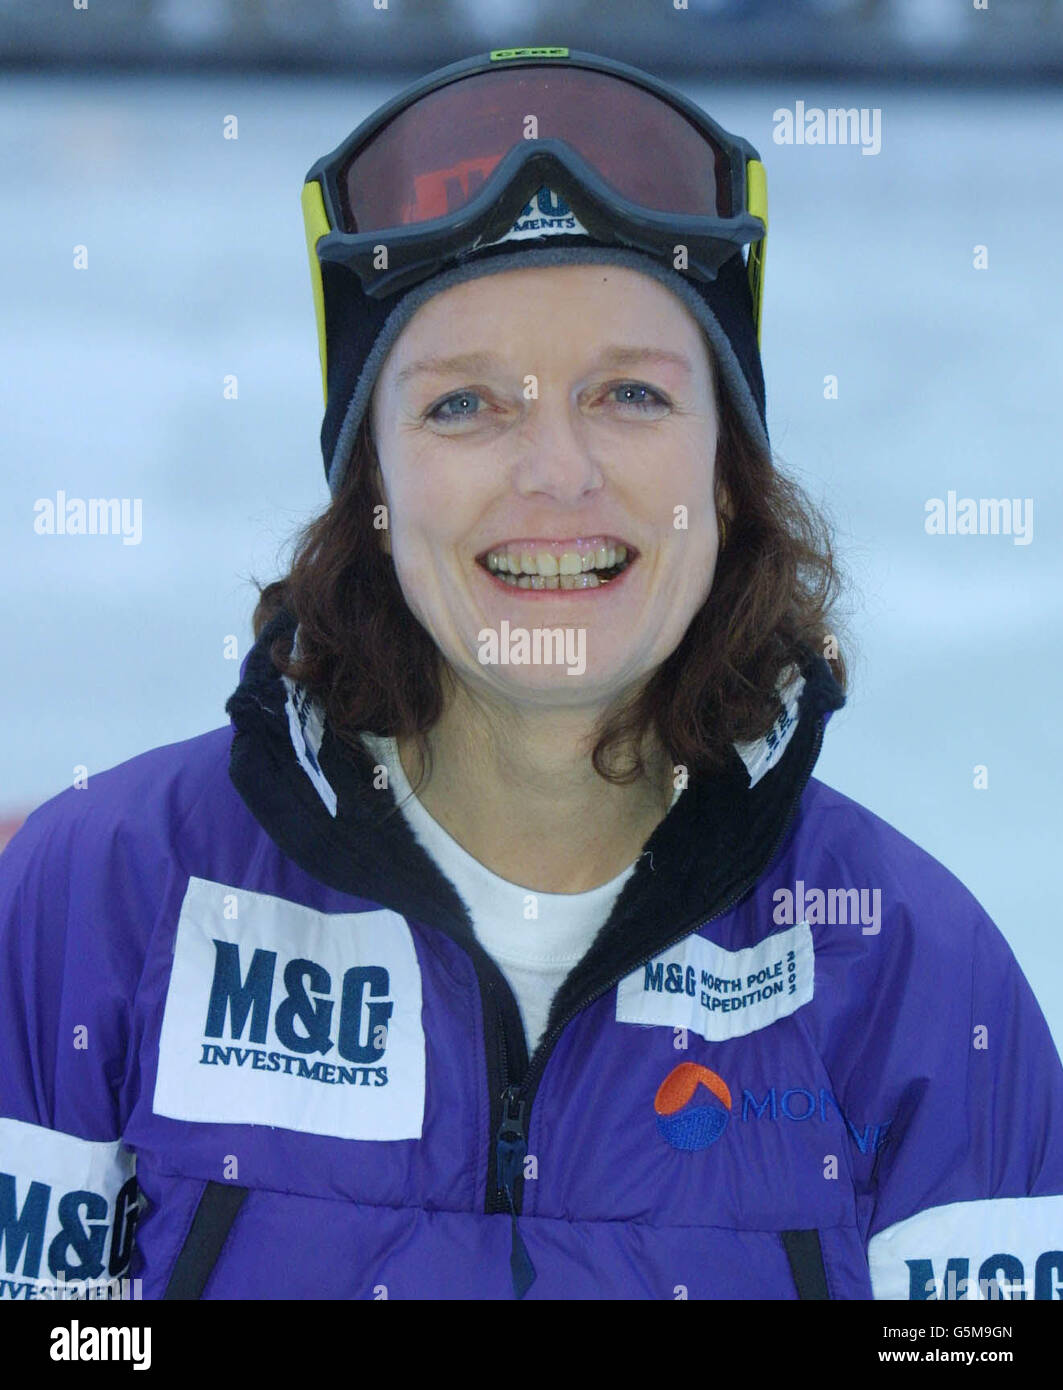 Pam Oliver, 50, from West Sussex at a photo call in London for M&G Investments North Pole Expedition 2002. Pam is part of an all British woman's trio which will try to be the first in the world to reach both Poles. She has already trekked to the South Pole. Stock Photo